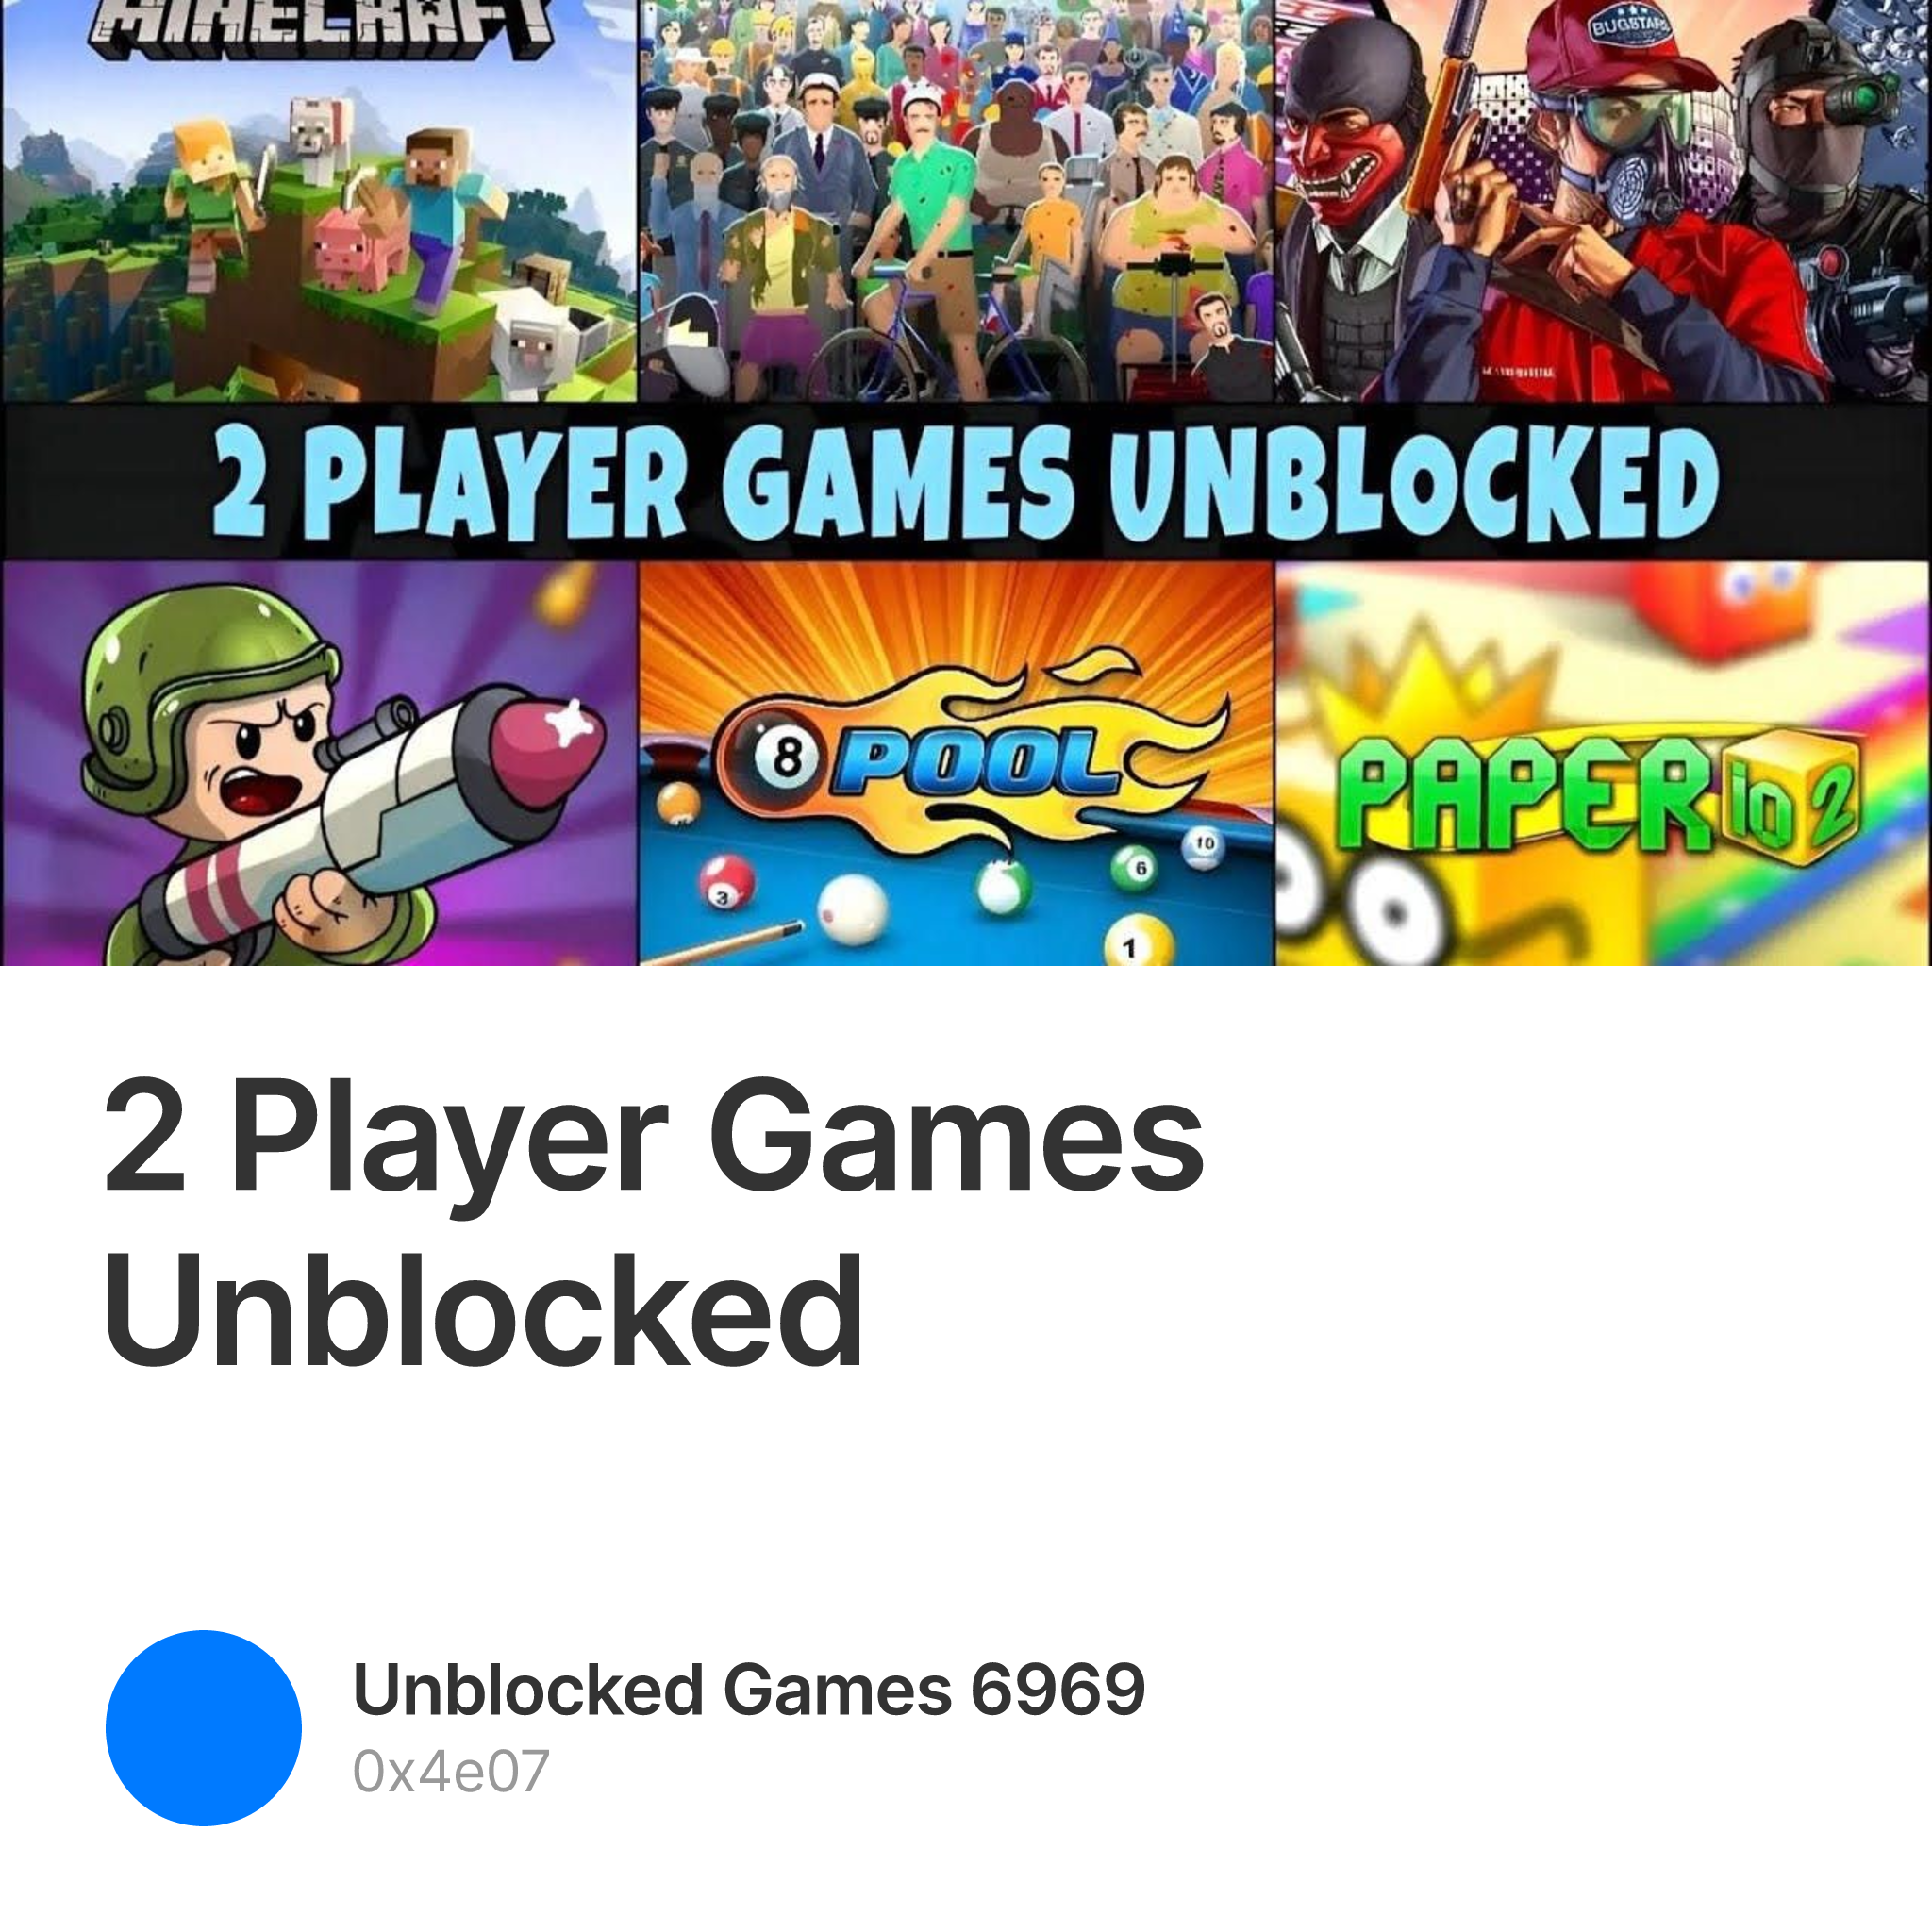 Two player games unblocked